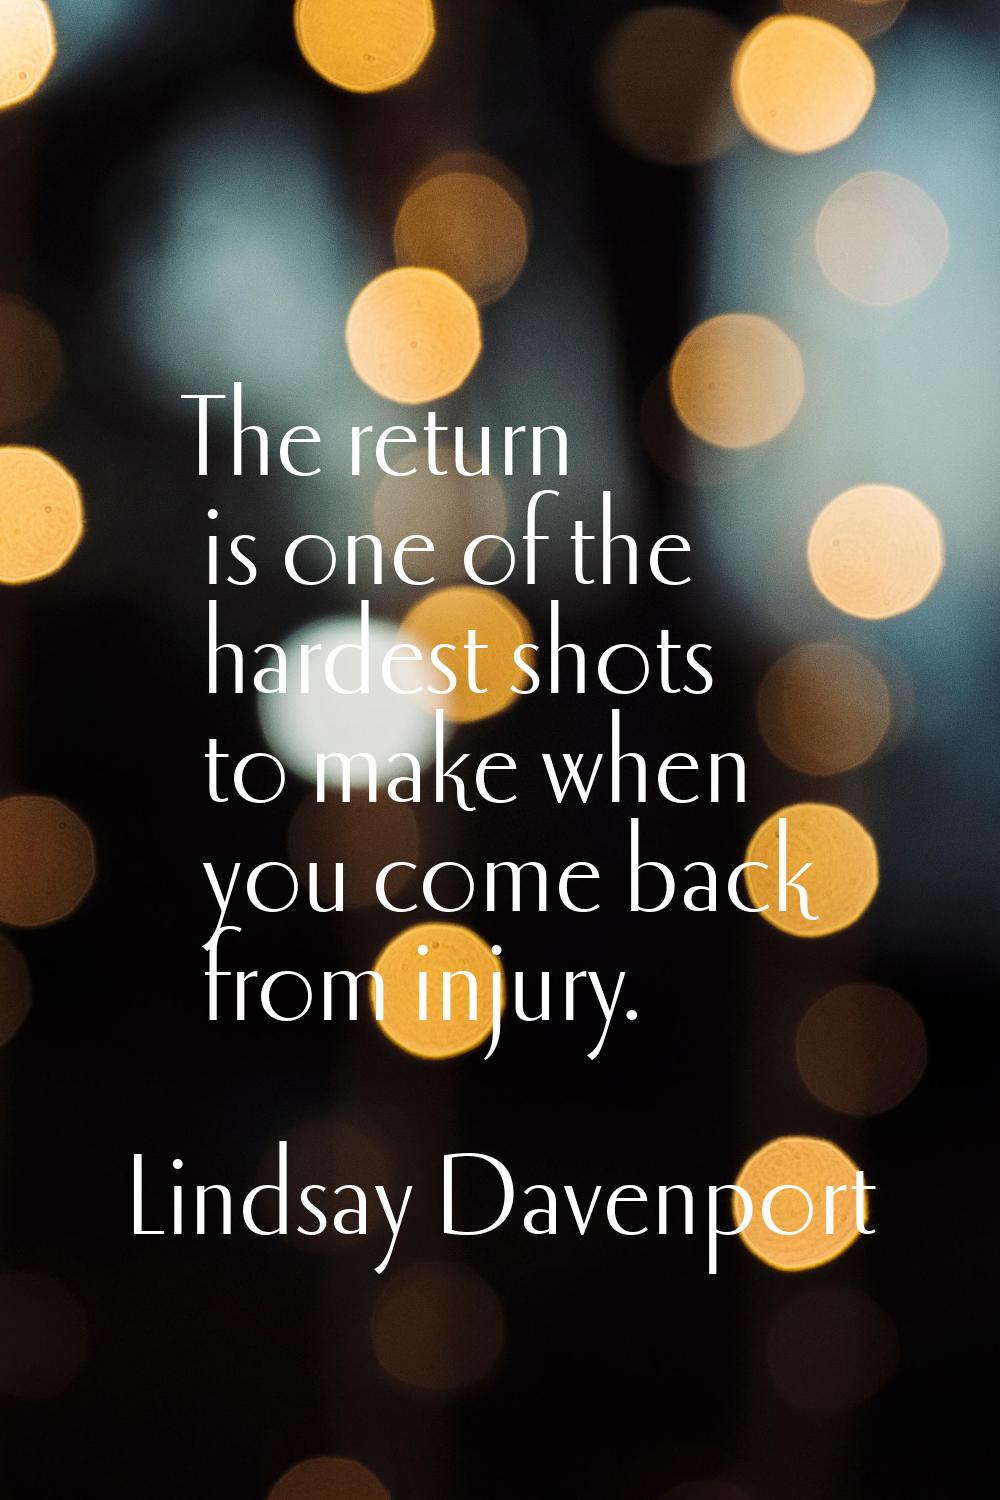 The return is one of the hardest shots to make when you come back from injury.